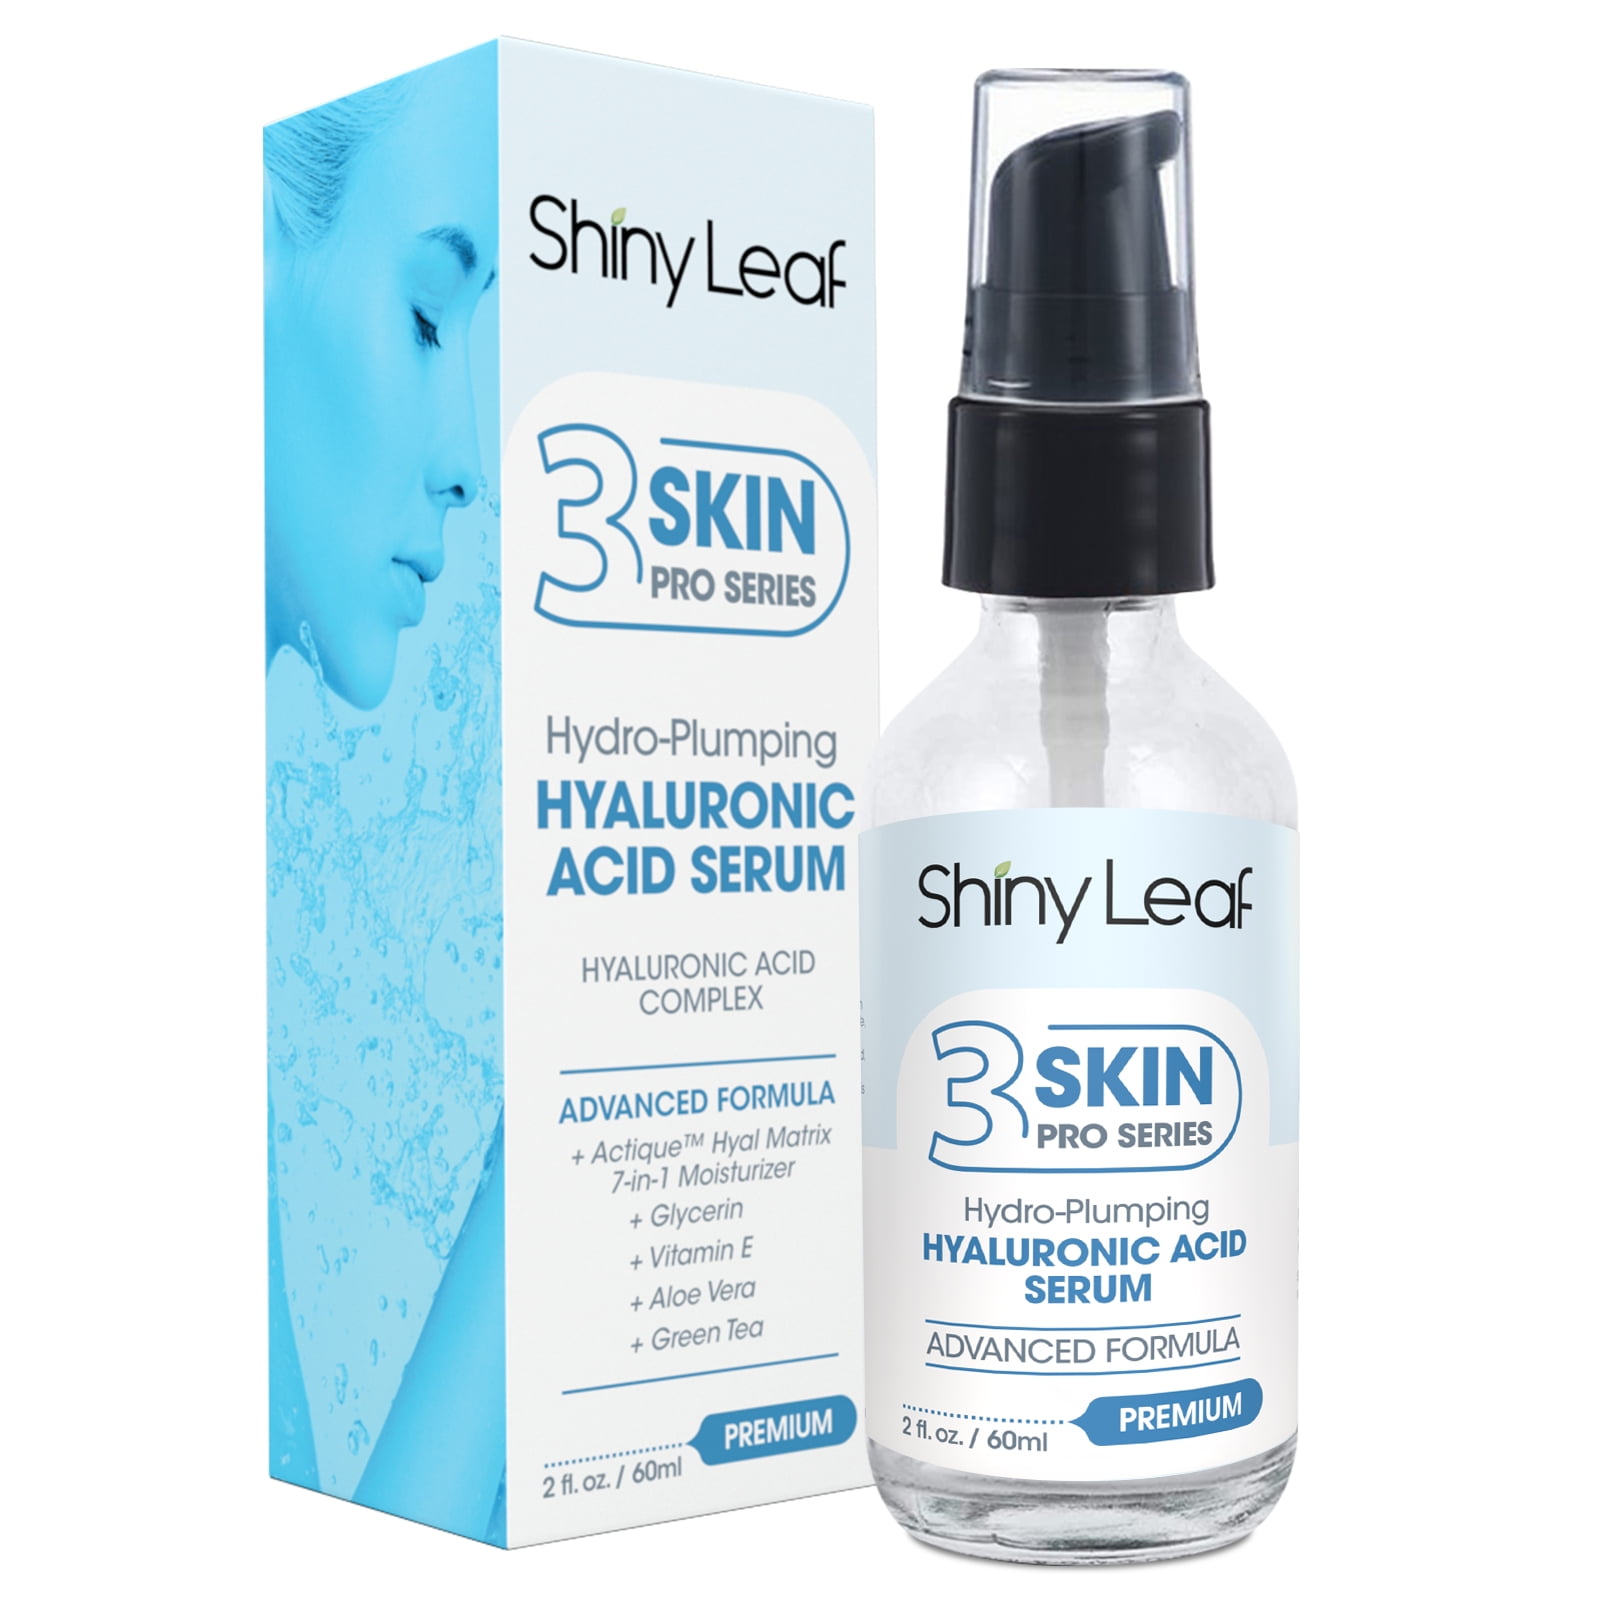 Overtollig Ambient balkon Shiny Leaf Hydro-Plumping Hyaluronic Acid Serum, Paraben and Alcohol-Free  Daily Skincare, 7-in-1 Actique™ Hyal Matrix Complex, Natural Moisturizers,  Rejuvenating Day / Night Serum for Dry Skin - Walmart.com